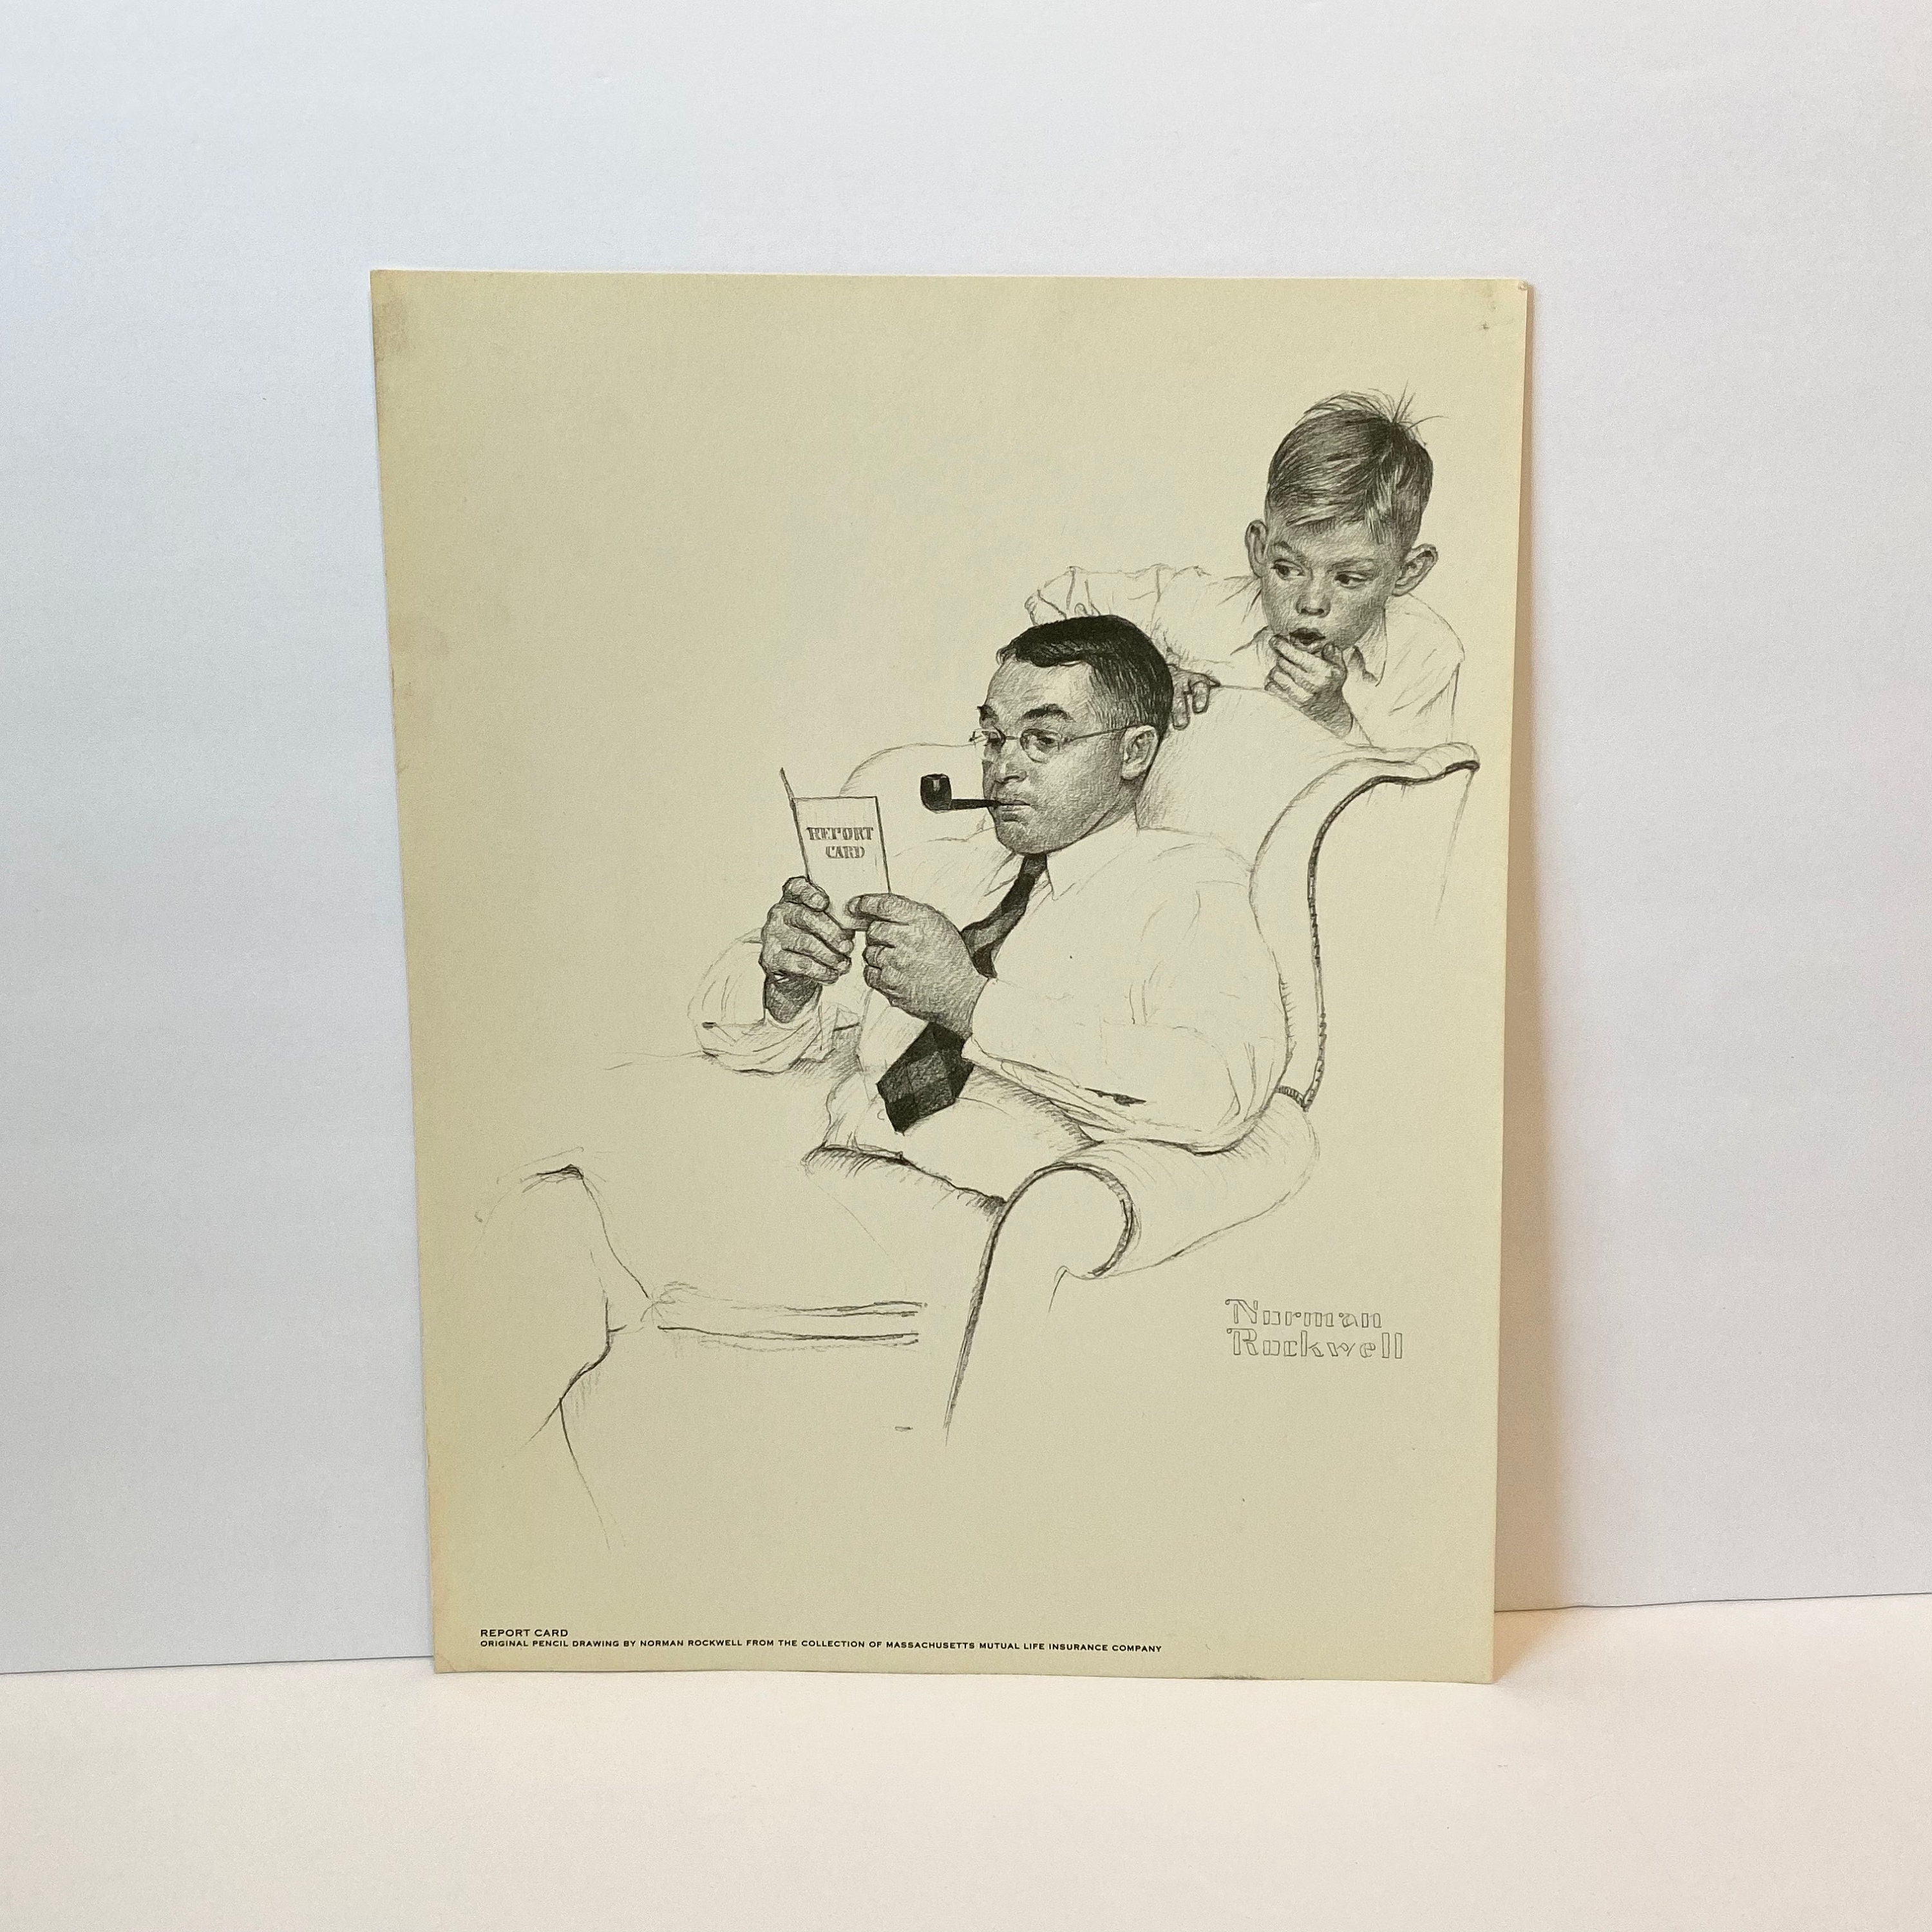 Norman Rockwell Pencil Drawings - 23 For Sale on 1stDibs | norman rockwell  original pencil drawings for sale, rockwell drawings, norman rockwell  sketches